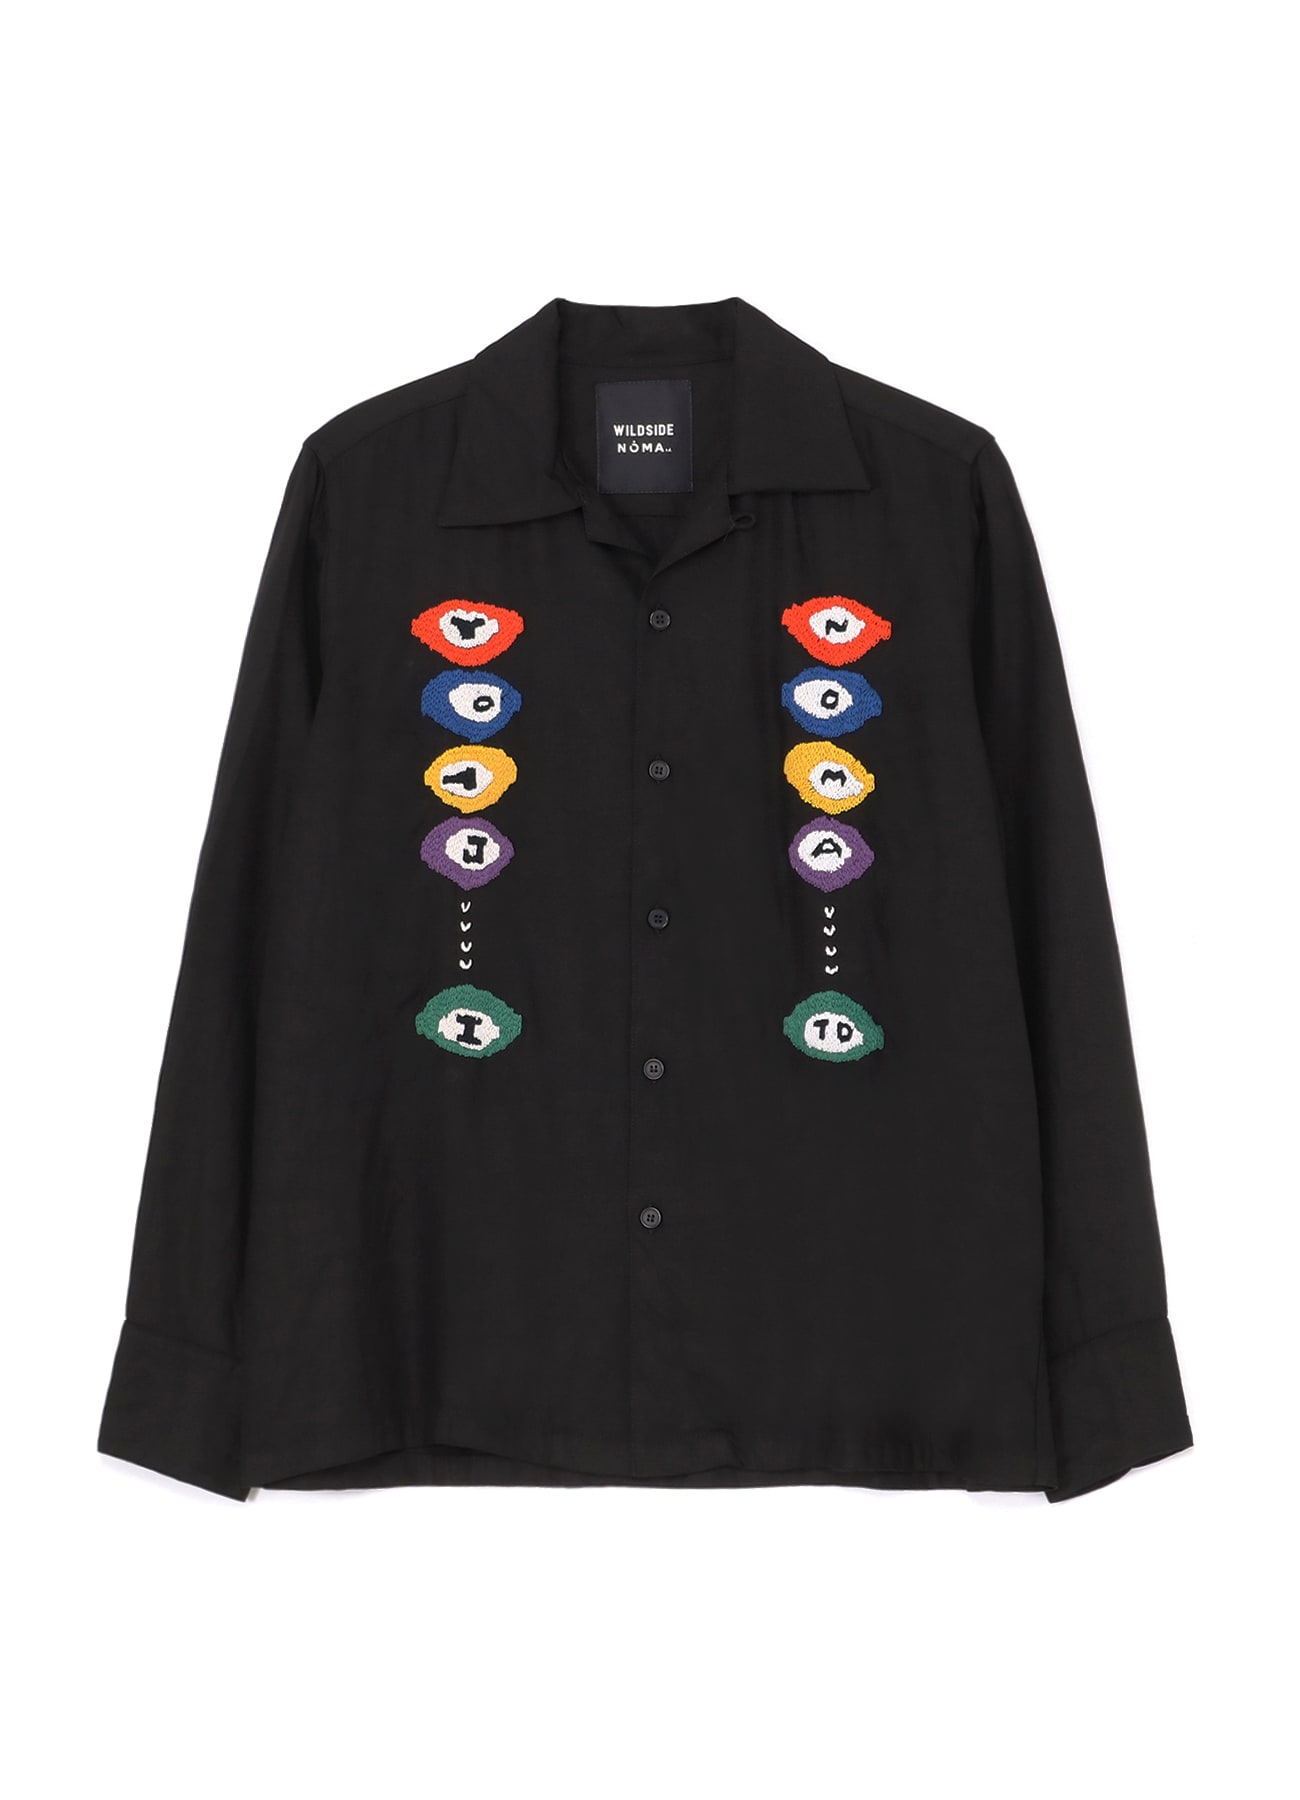 WILDSIDE × NOMA t.d. BILLIARDS HAND EMBROIDERY LS SHIRT